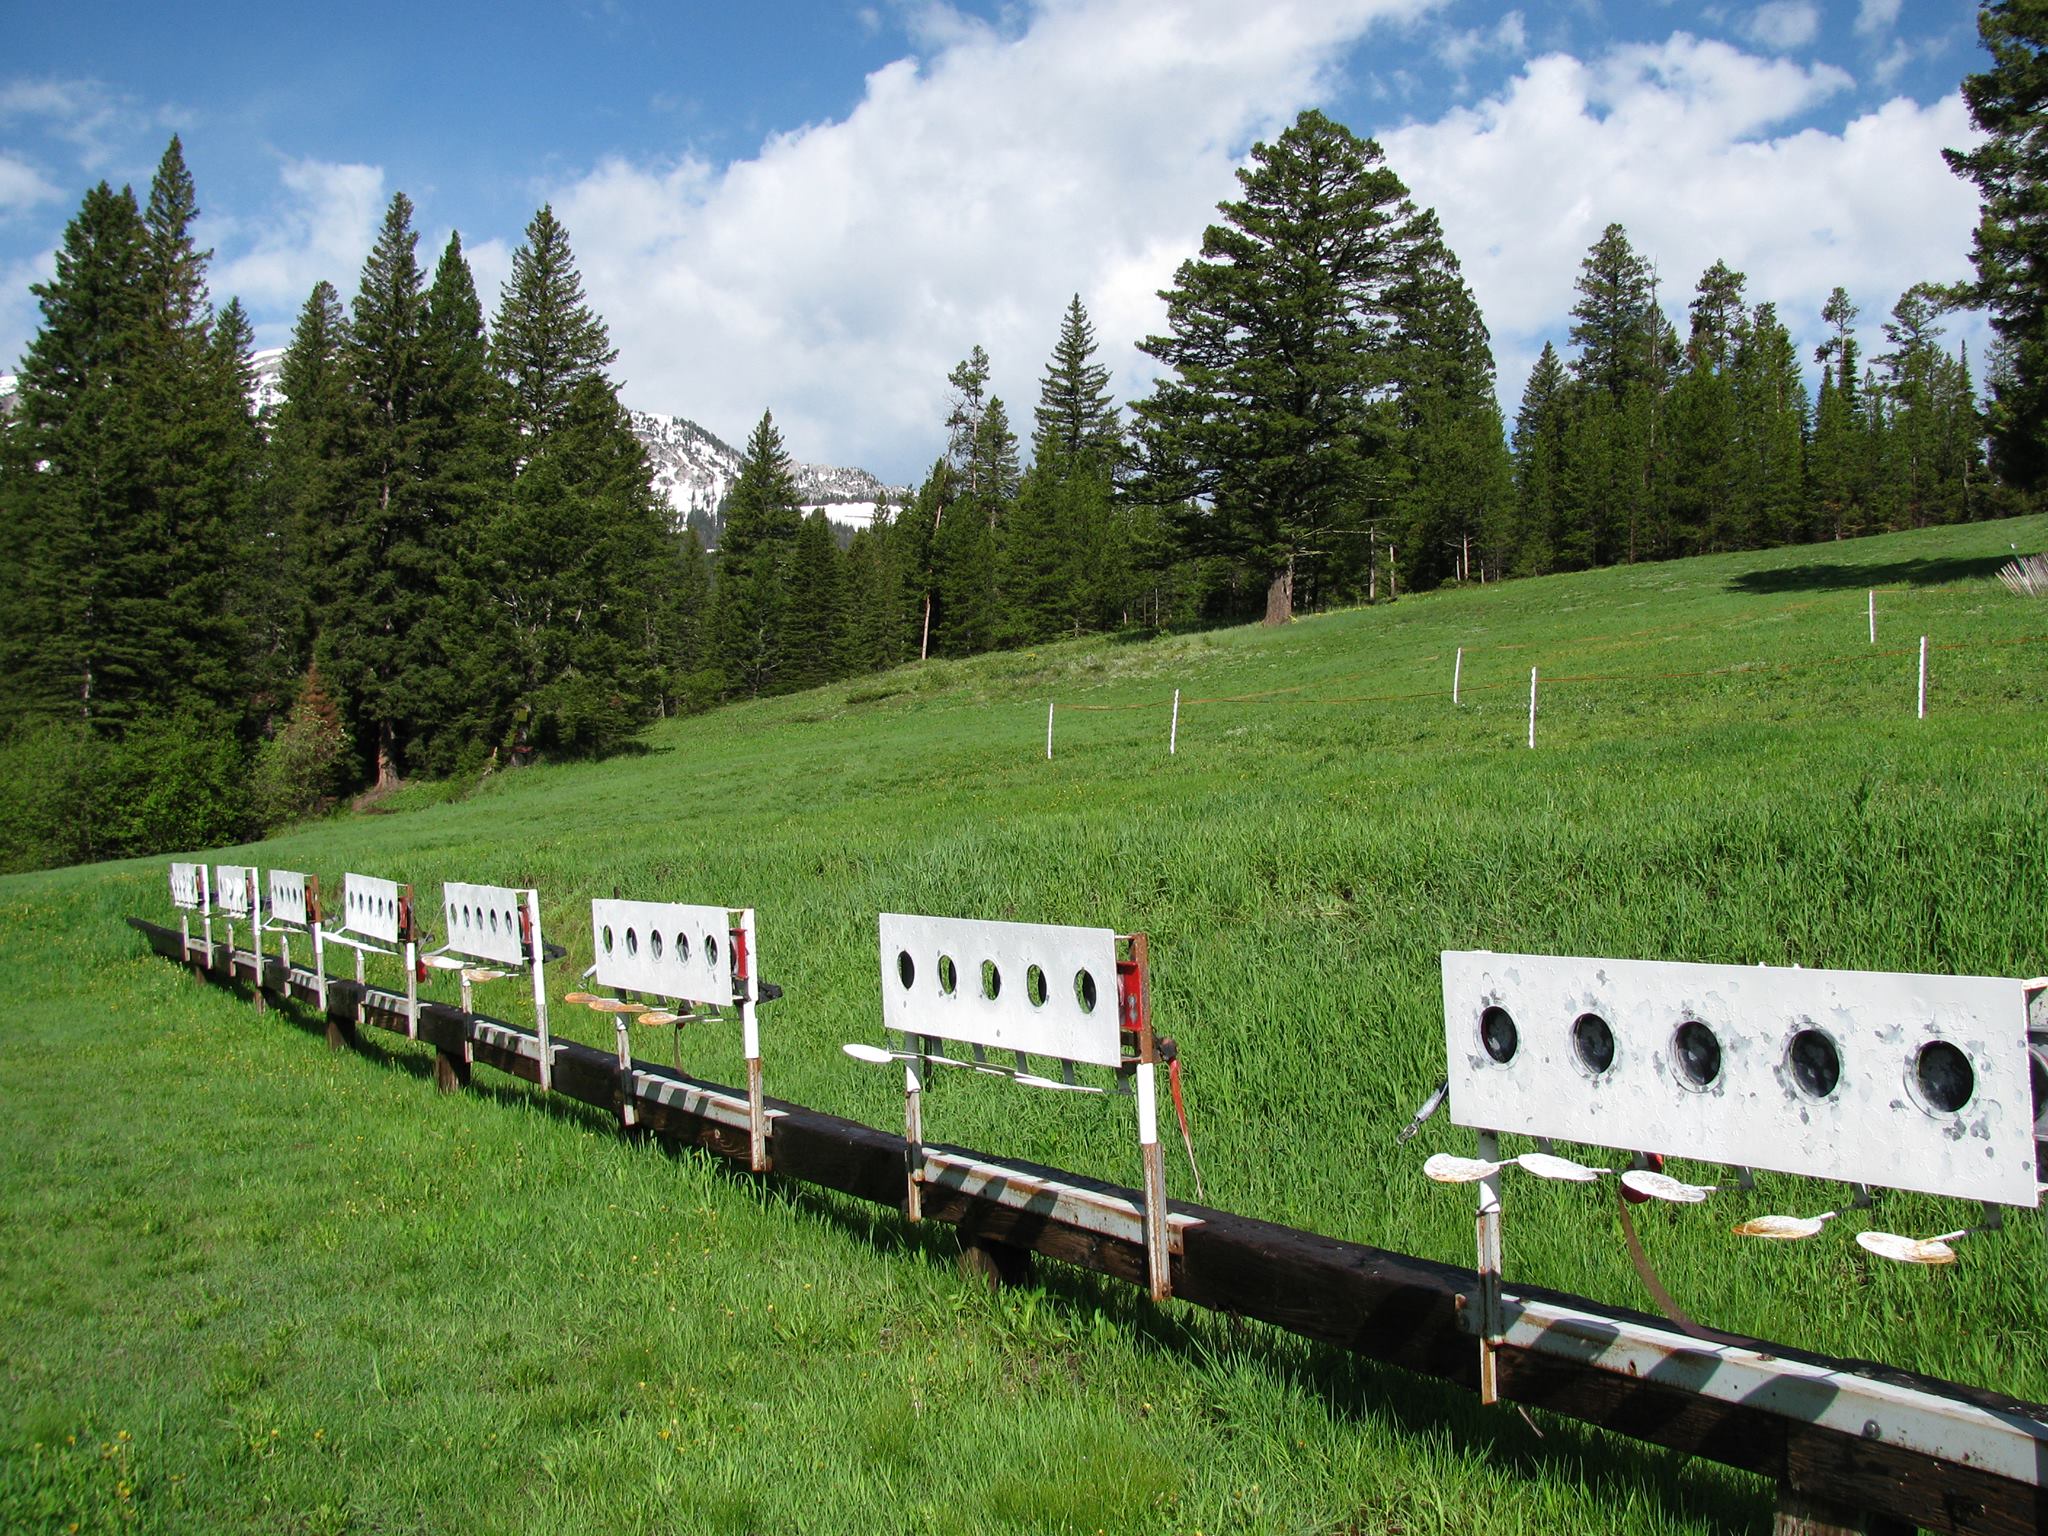 The biathlon range at Bohart Ranch in Bozeman, Mont. was installed in 1989 at the hight of the sport in the small mountain town. The Bridger Biathlon Club is attempting to bring Biathlon back to Bozeman and is starting by installing new targets from Norway. (Photo: Bridger Biathlon Club) 